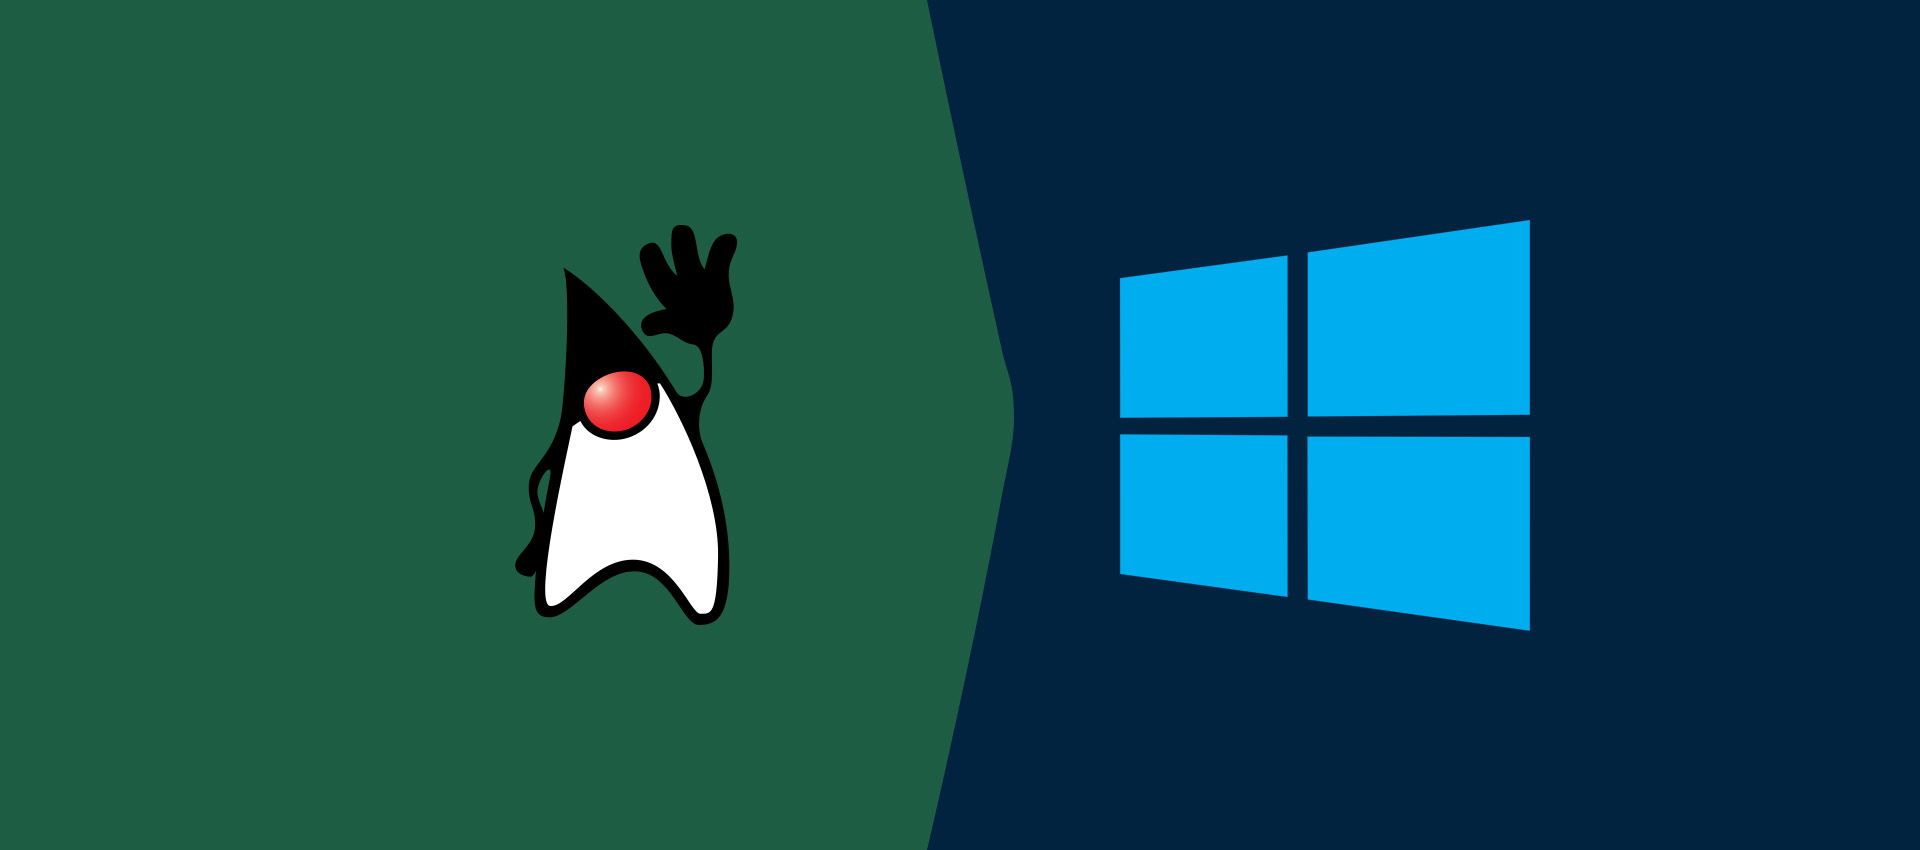 openjdk 15 download for windows